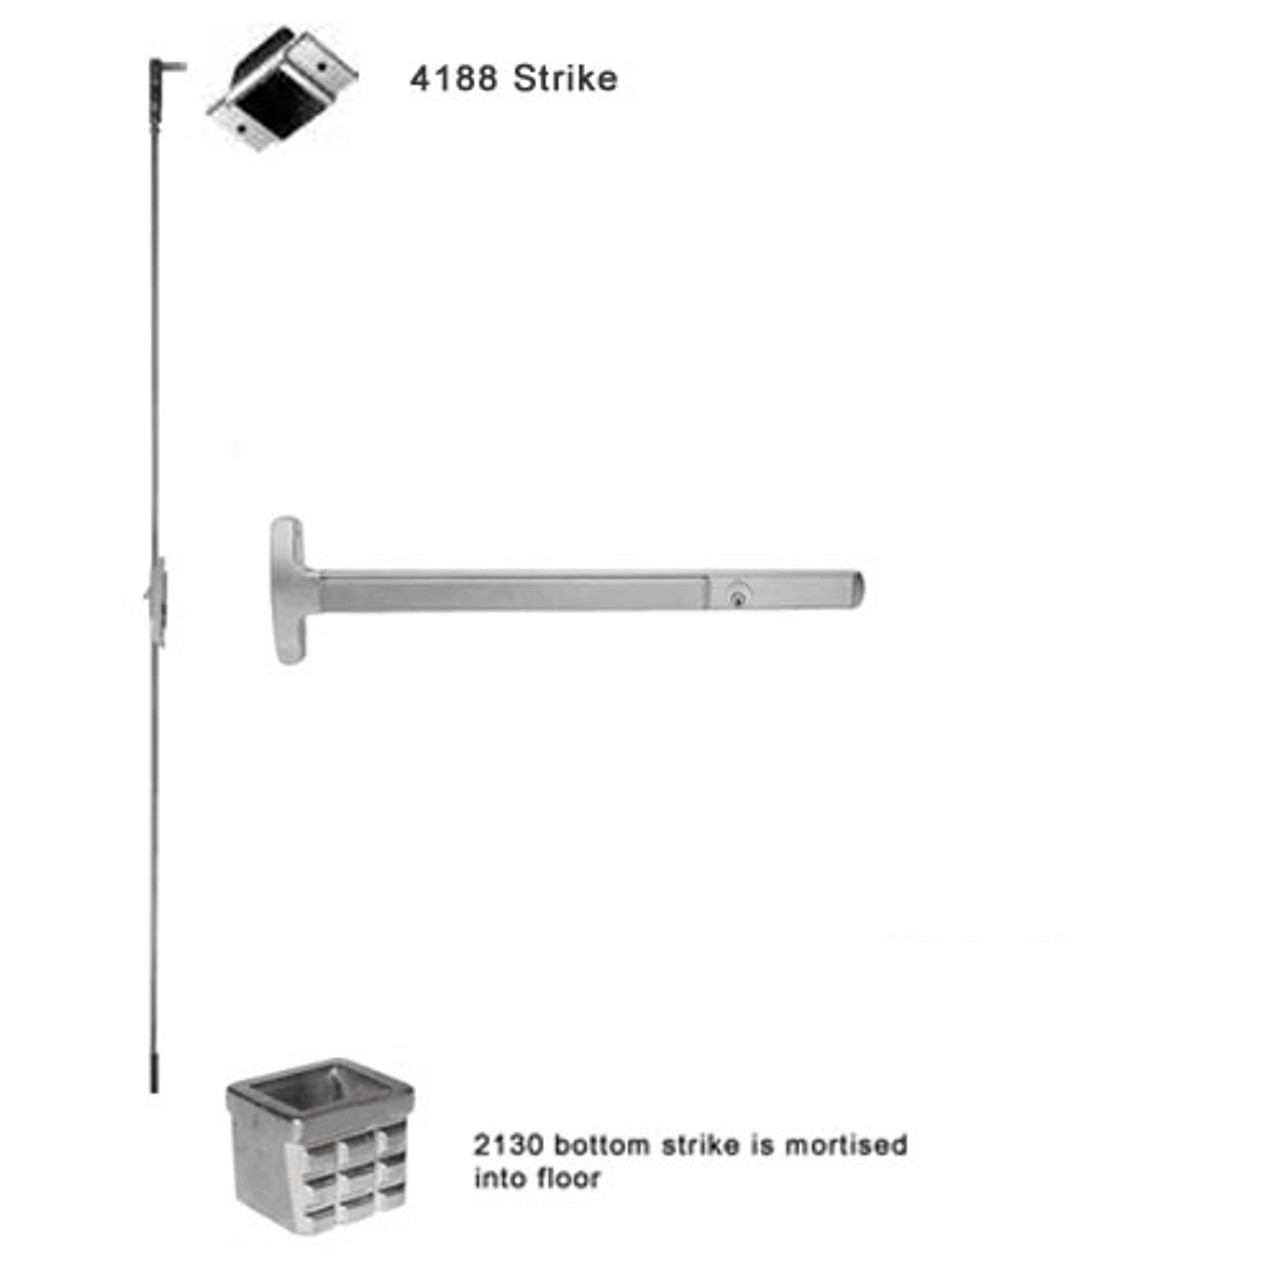 CD24-C-L-BE-DANE-US32-2-LHR Falcon 24 Series Concealed Vertical Rod Device 712L-BE Dane Lever Trim with Blank Escutcheon in Polished Stainless Steel